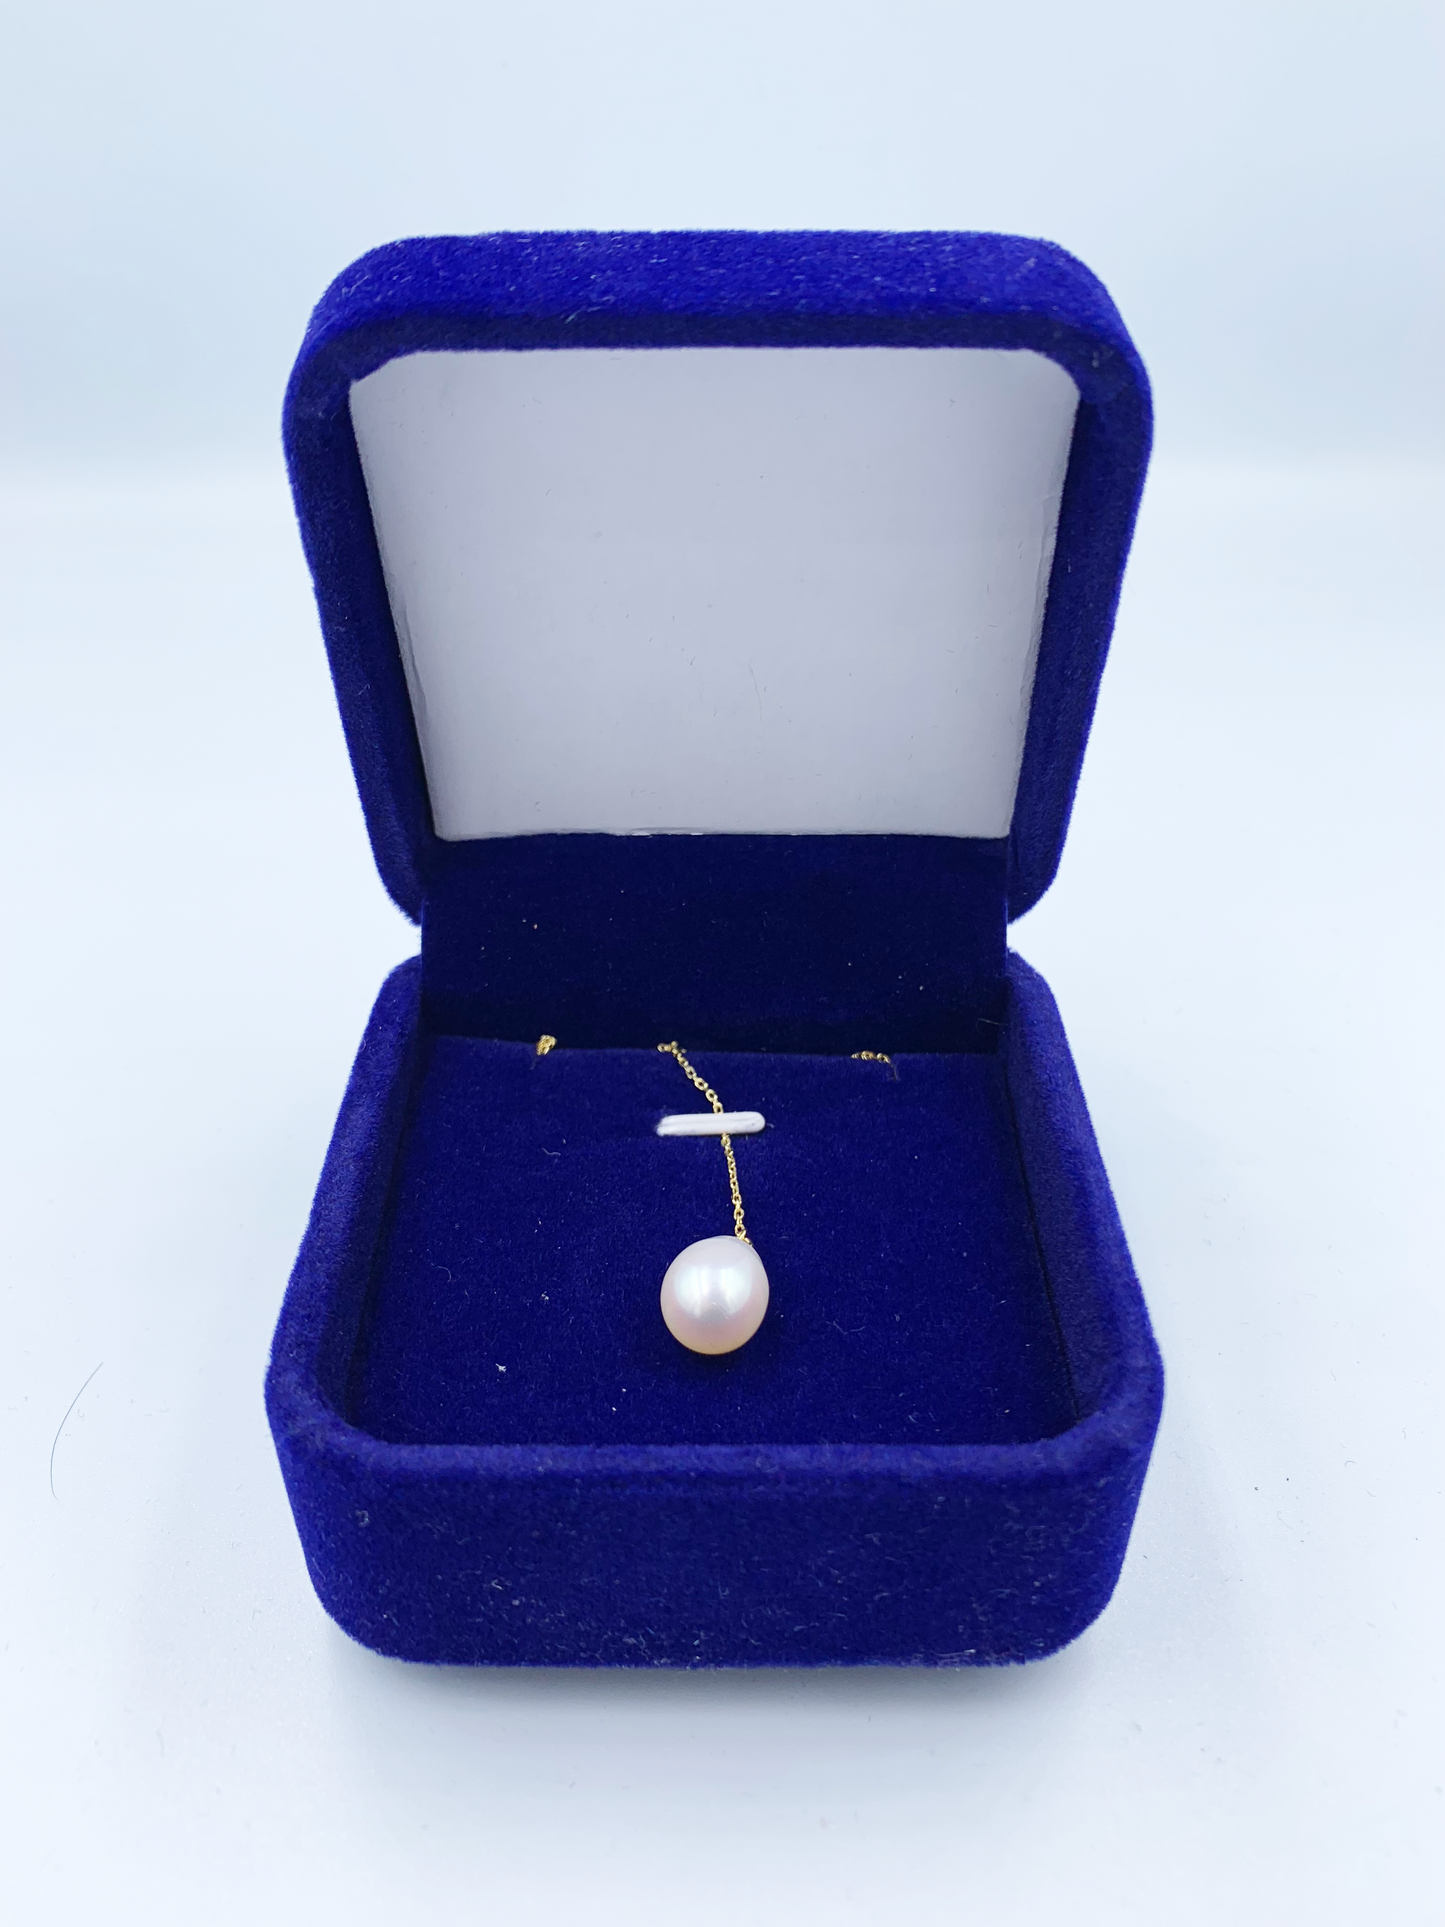 PA - Real Drop Pearl Pendant With 925 Sterling Silver White Gold, Yellow Gold, or Rose Gold Colour Chain Necklace With Celeste 925 Fresh Water Pearls Collection Sterling Silver gift box